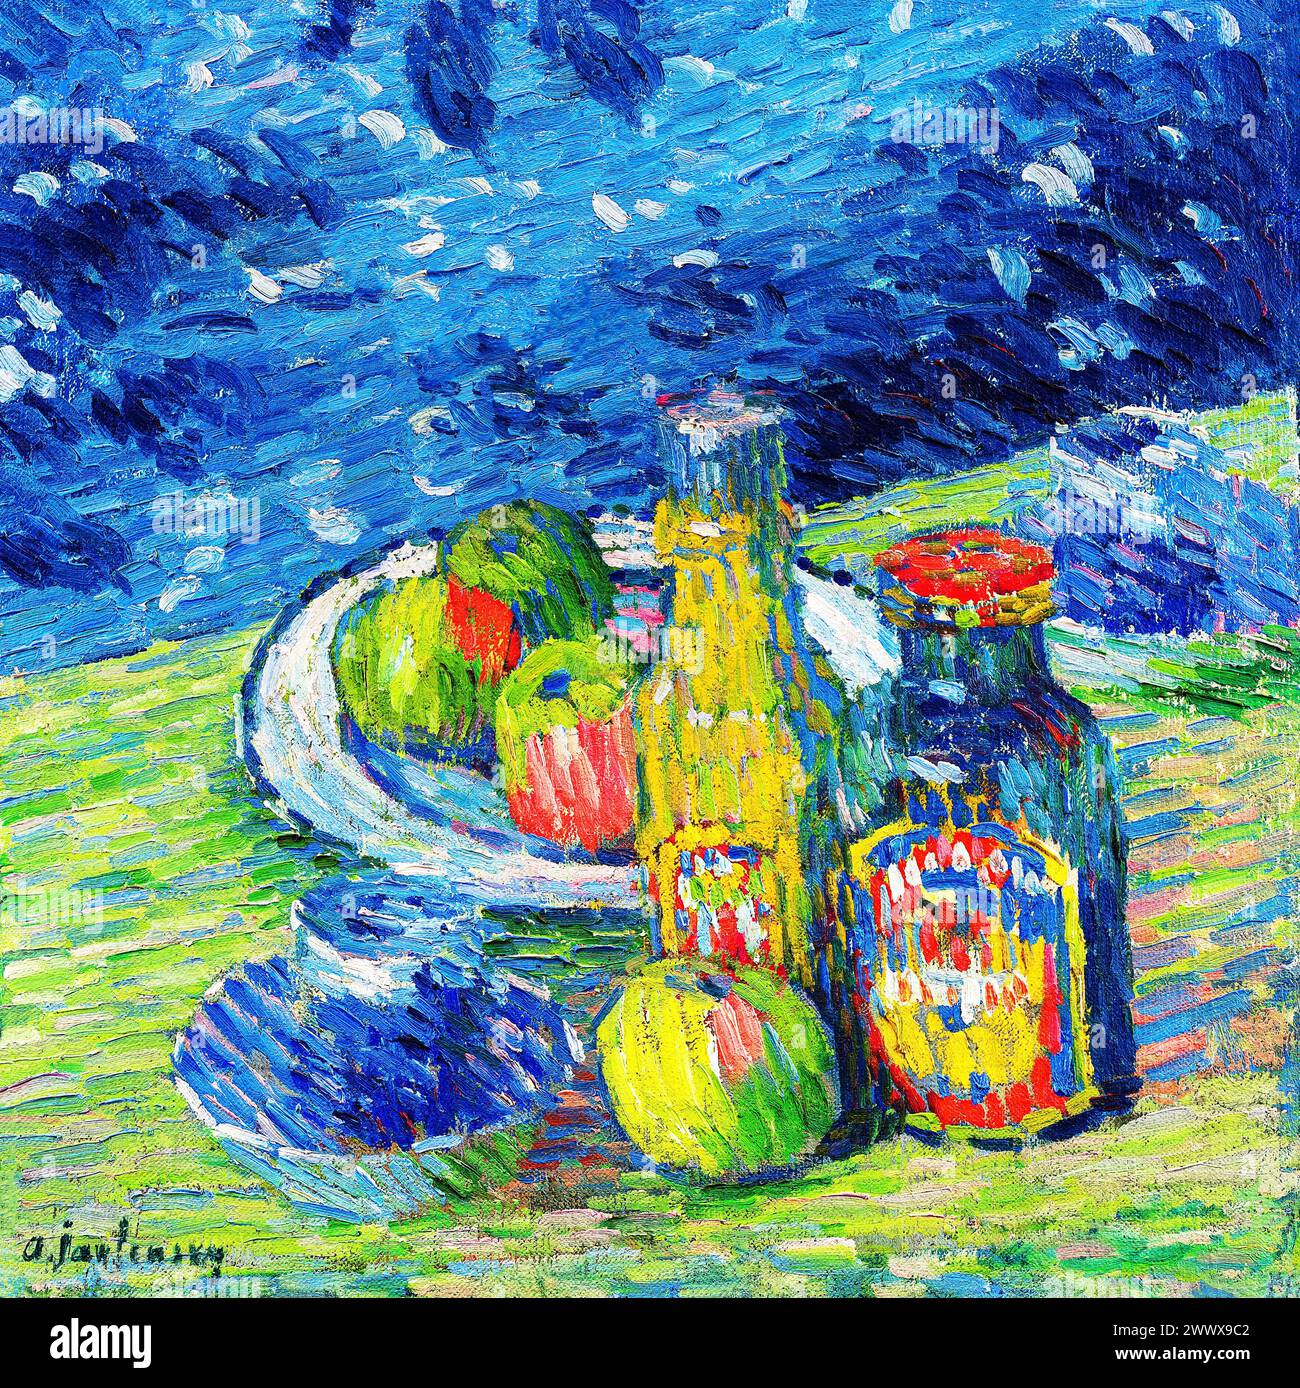 Still Life with Bottles and Fruit (1900) vintage painting by Alexej von Jawlensky. Original public domain image from The National Gallery of Art. Stock Photo